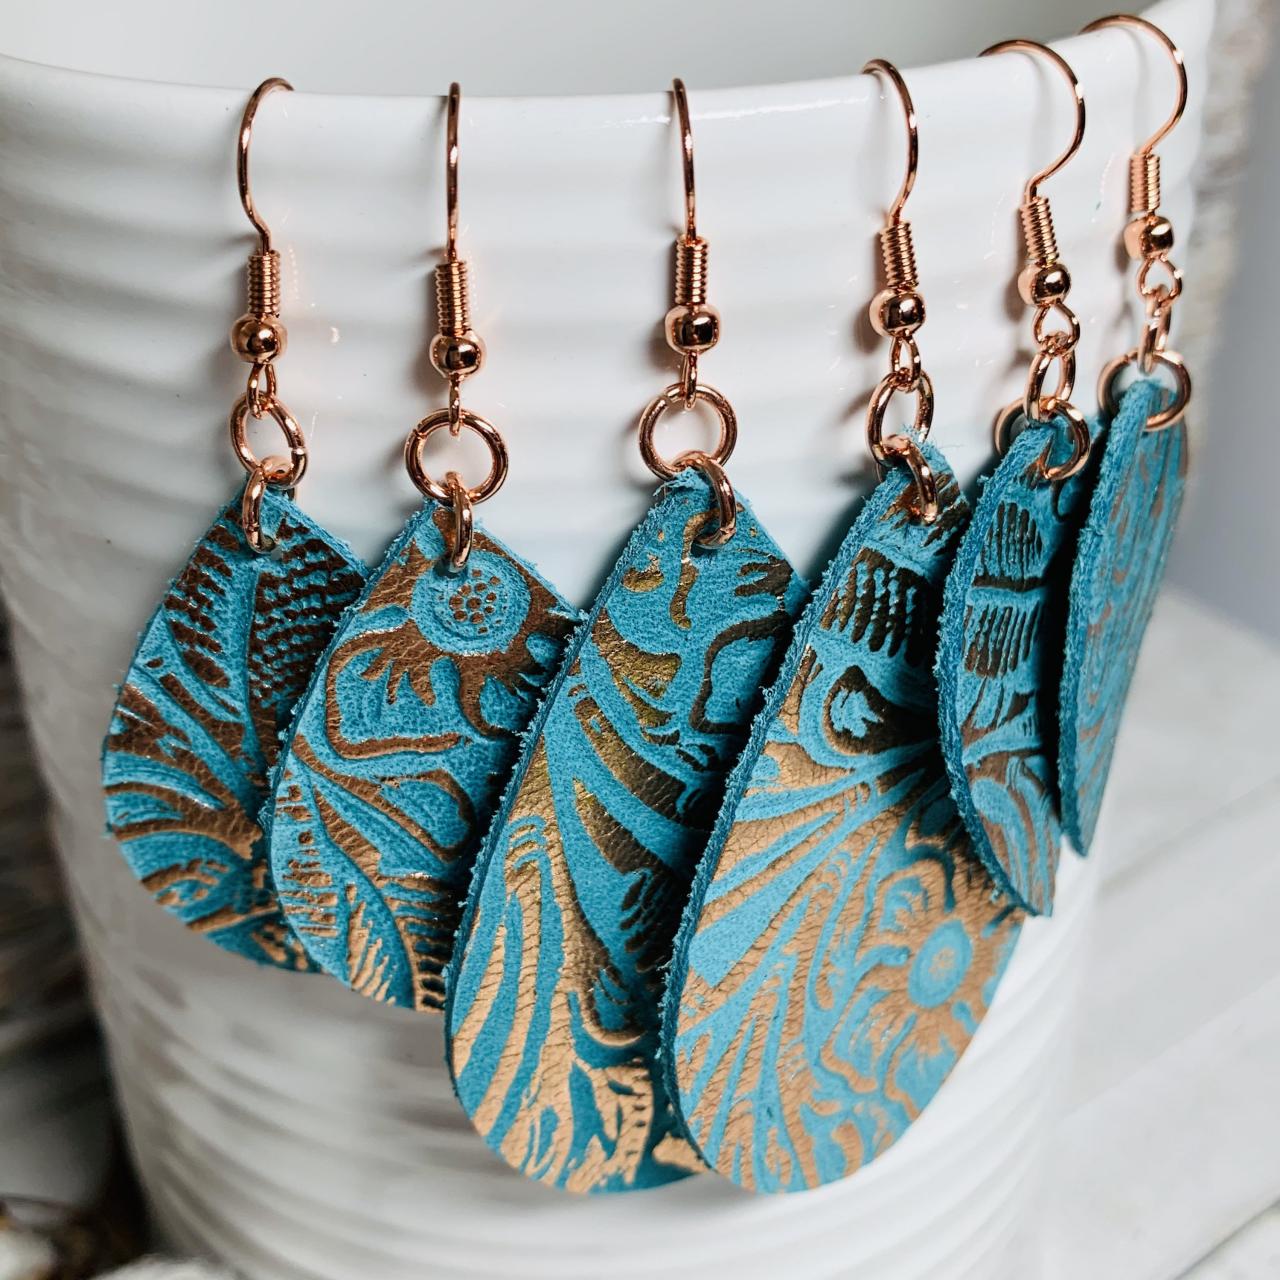 Cute Leather Earrings, Leather Earrings | Leather Earrings Teardrop | Teal Leather Earrings | Western Earrings | Embossed Leather